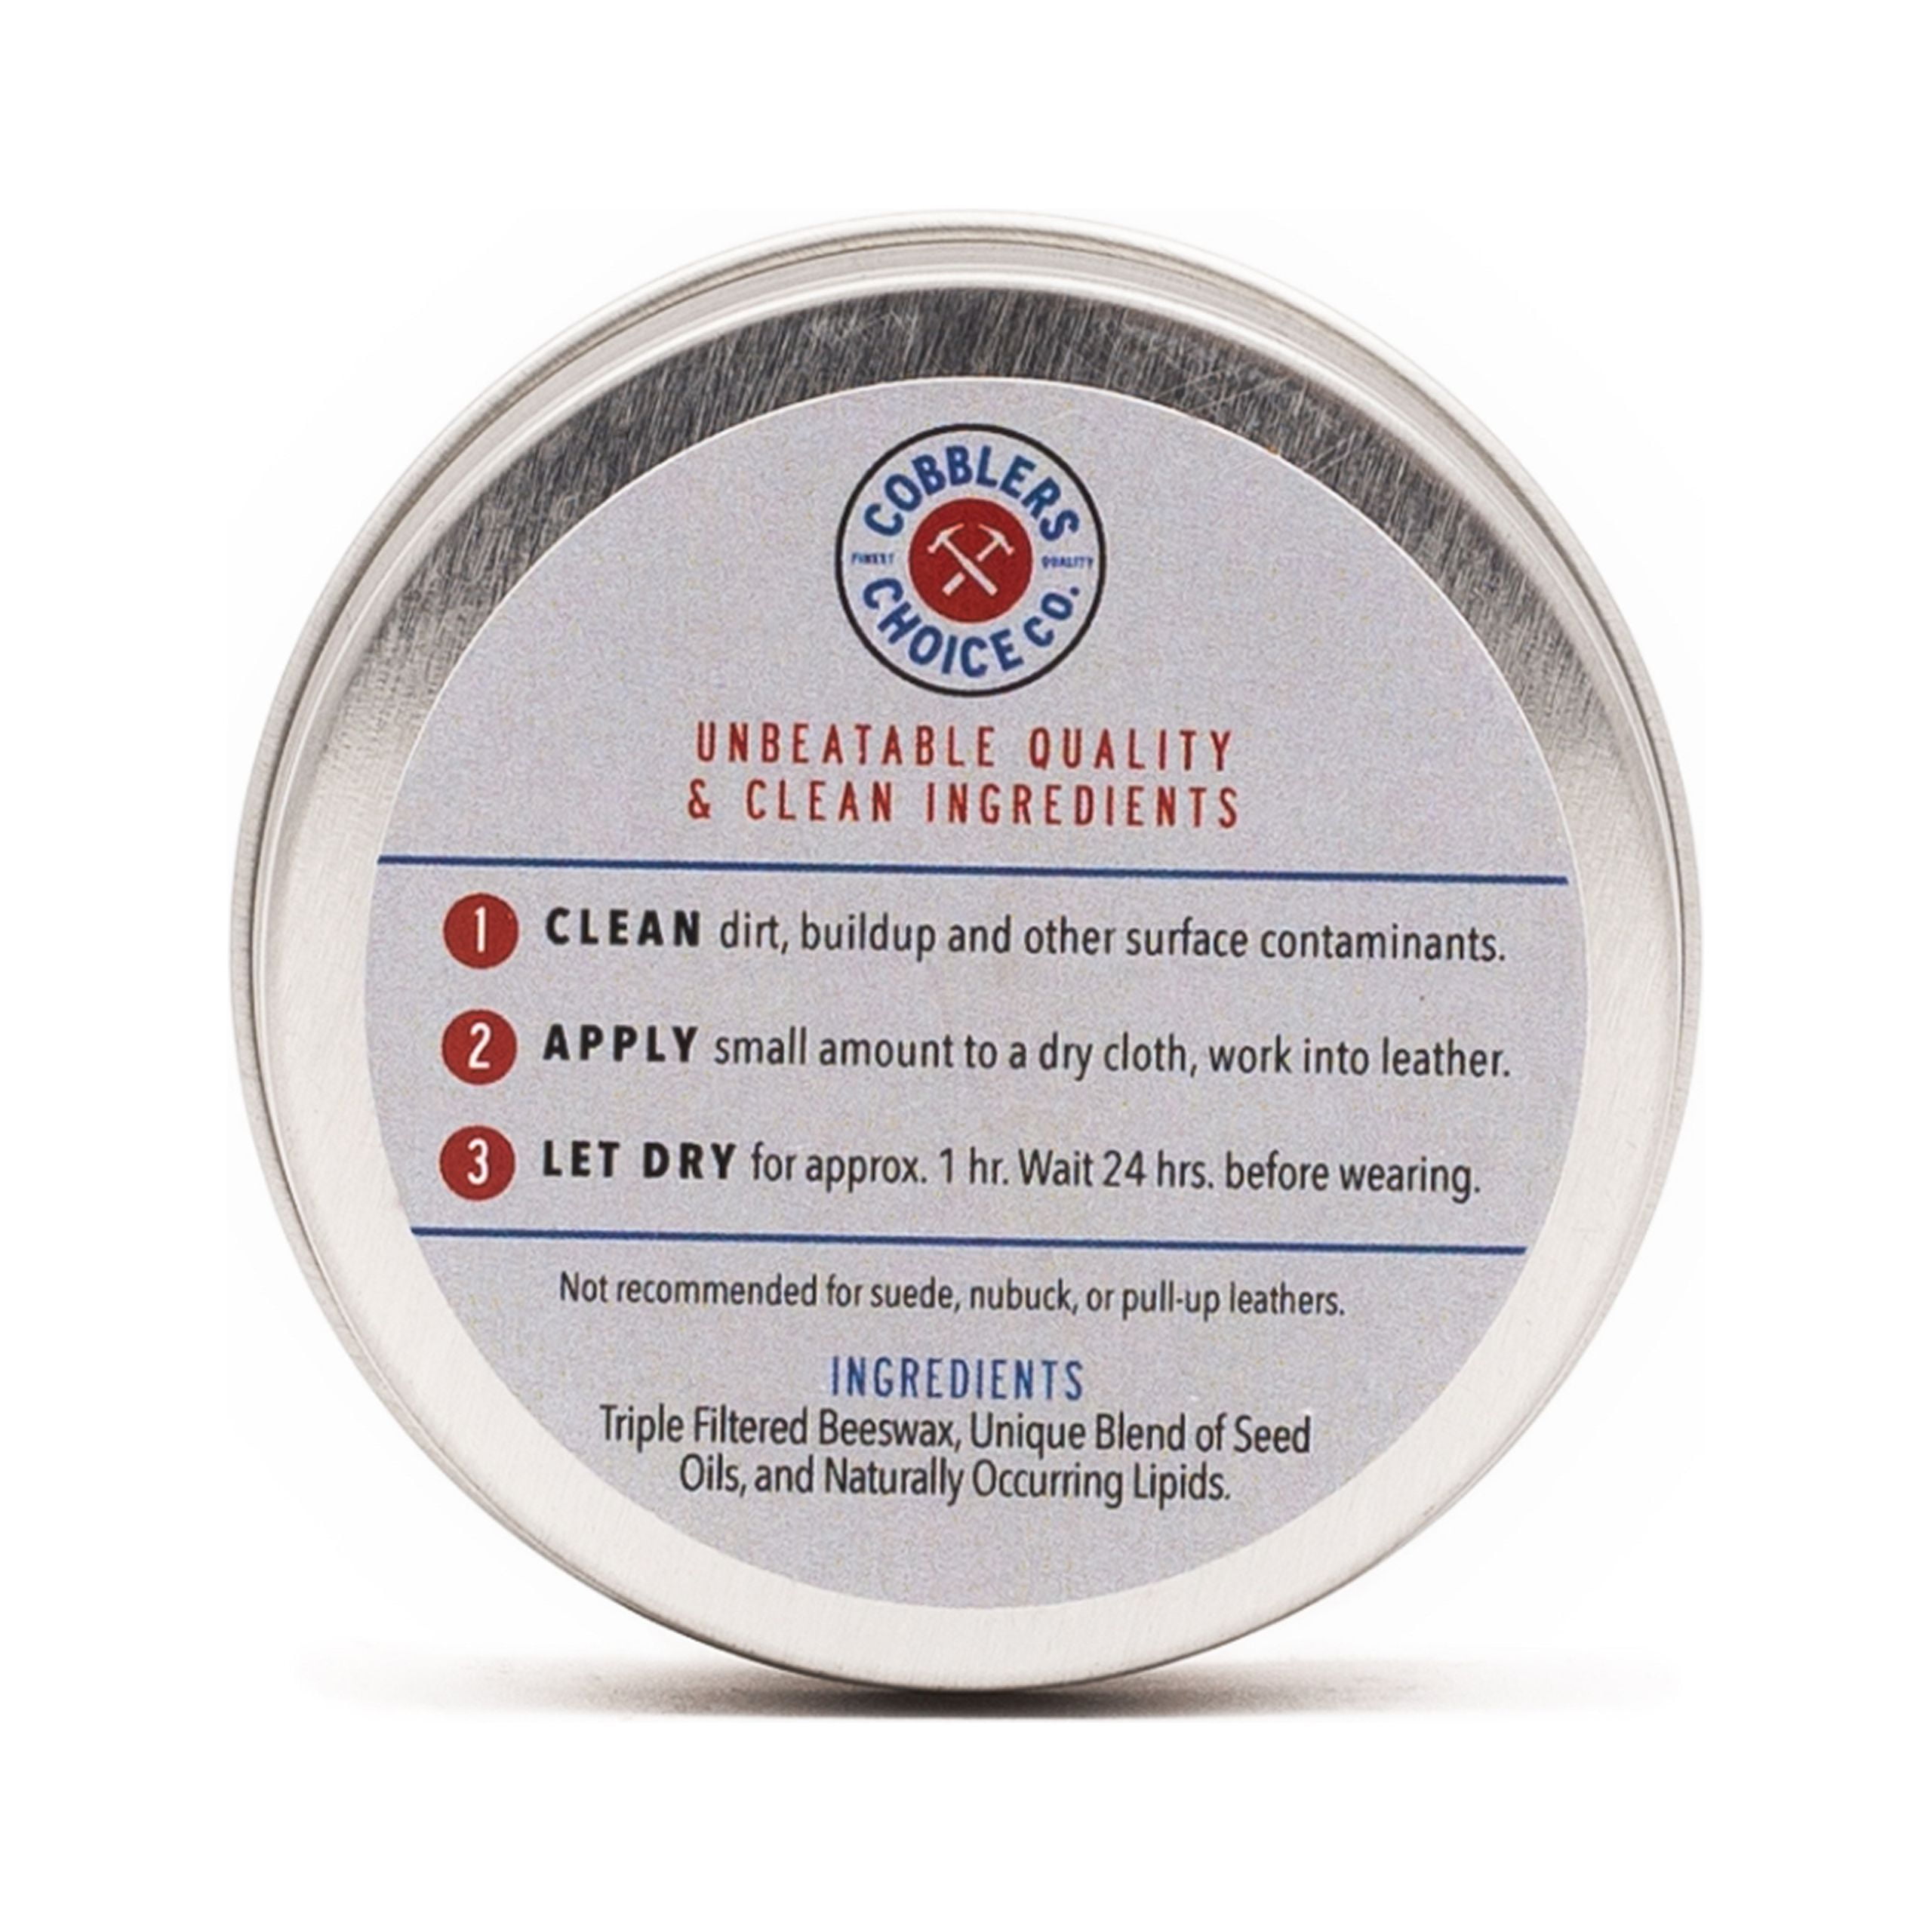 Cobbler's Choice Essential Leather Kit - Premium Shoe Care - All Natural Ingredients - Unbeatable Quality!